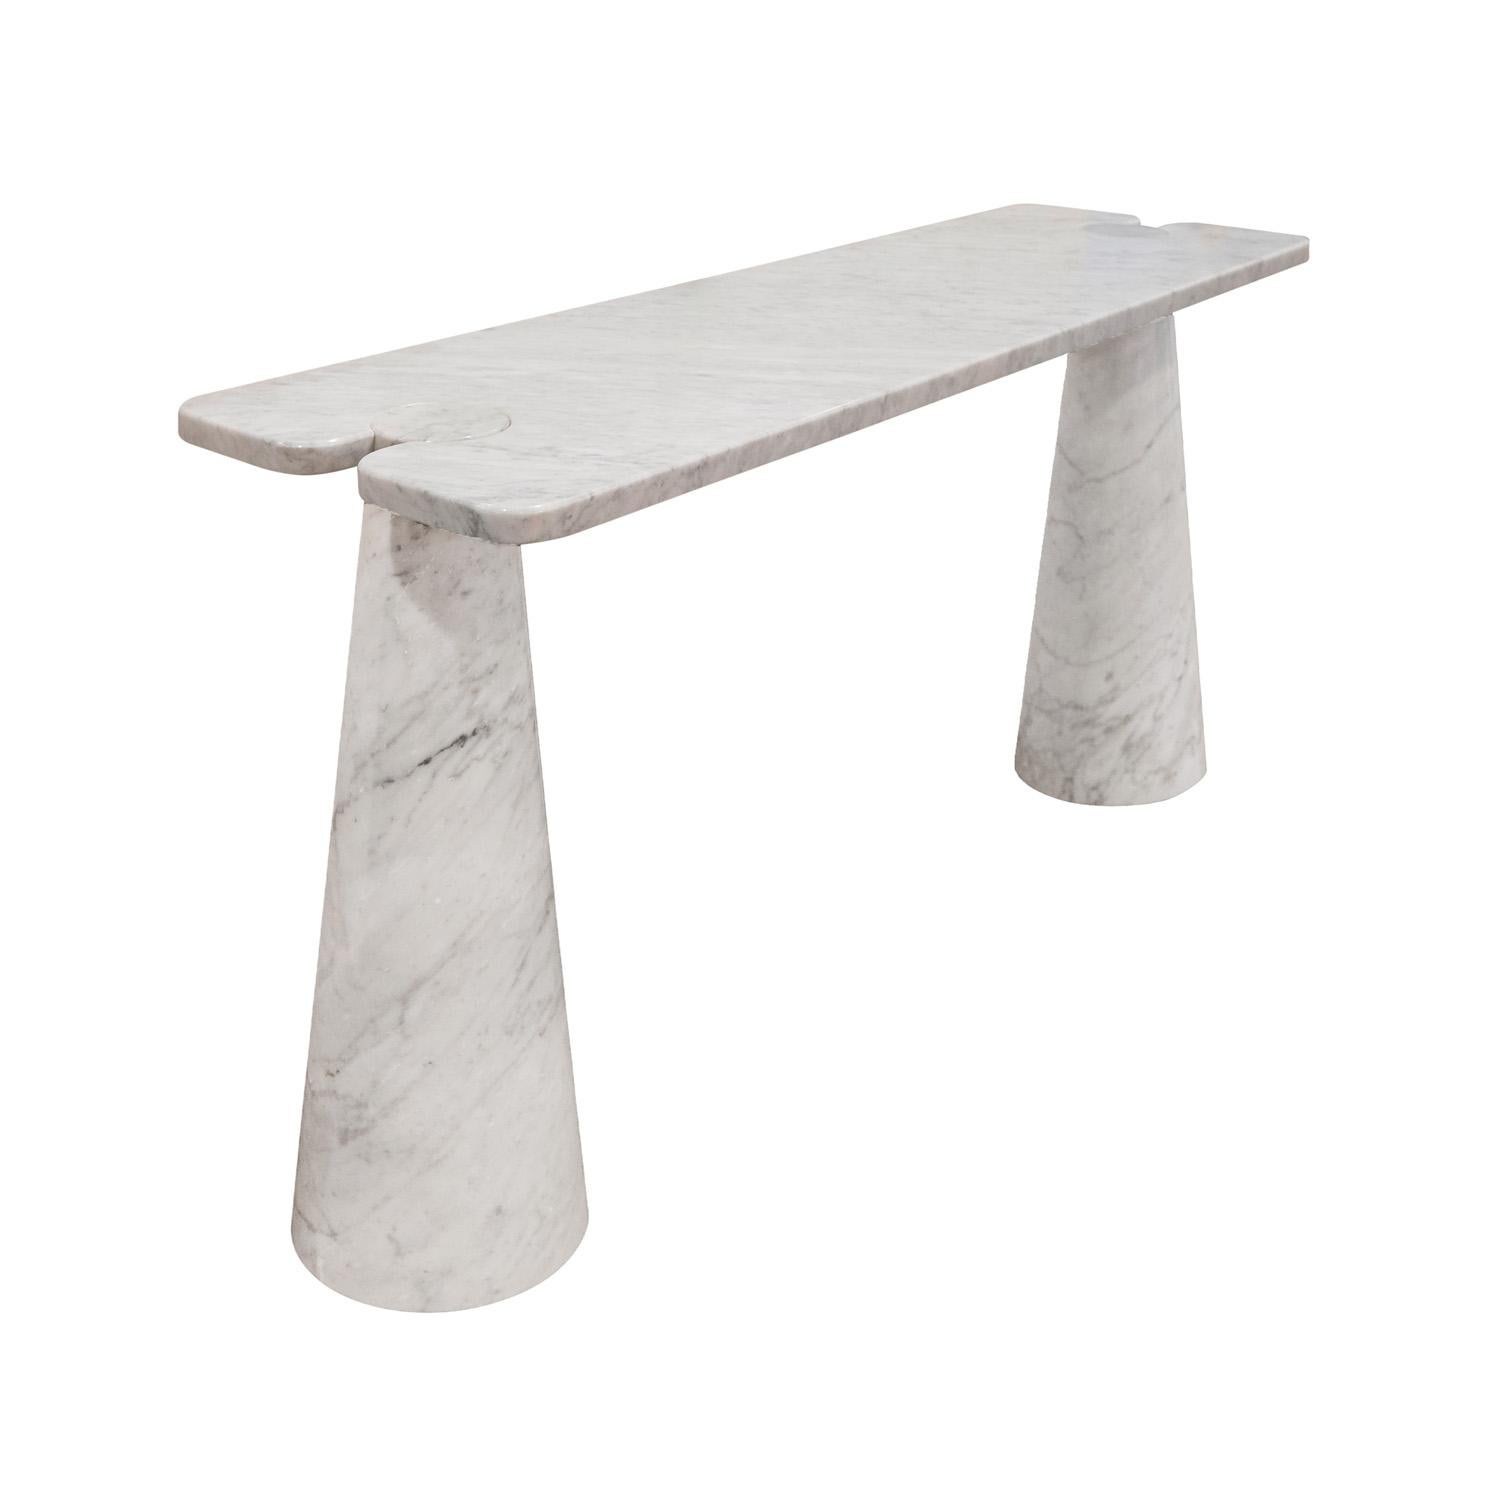 Mid-Century Modern Angelo Mangiarotti Eros Collection Console Table in Polished White Marble 1970s